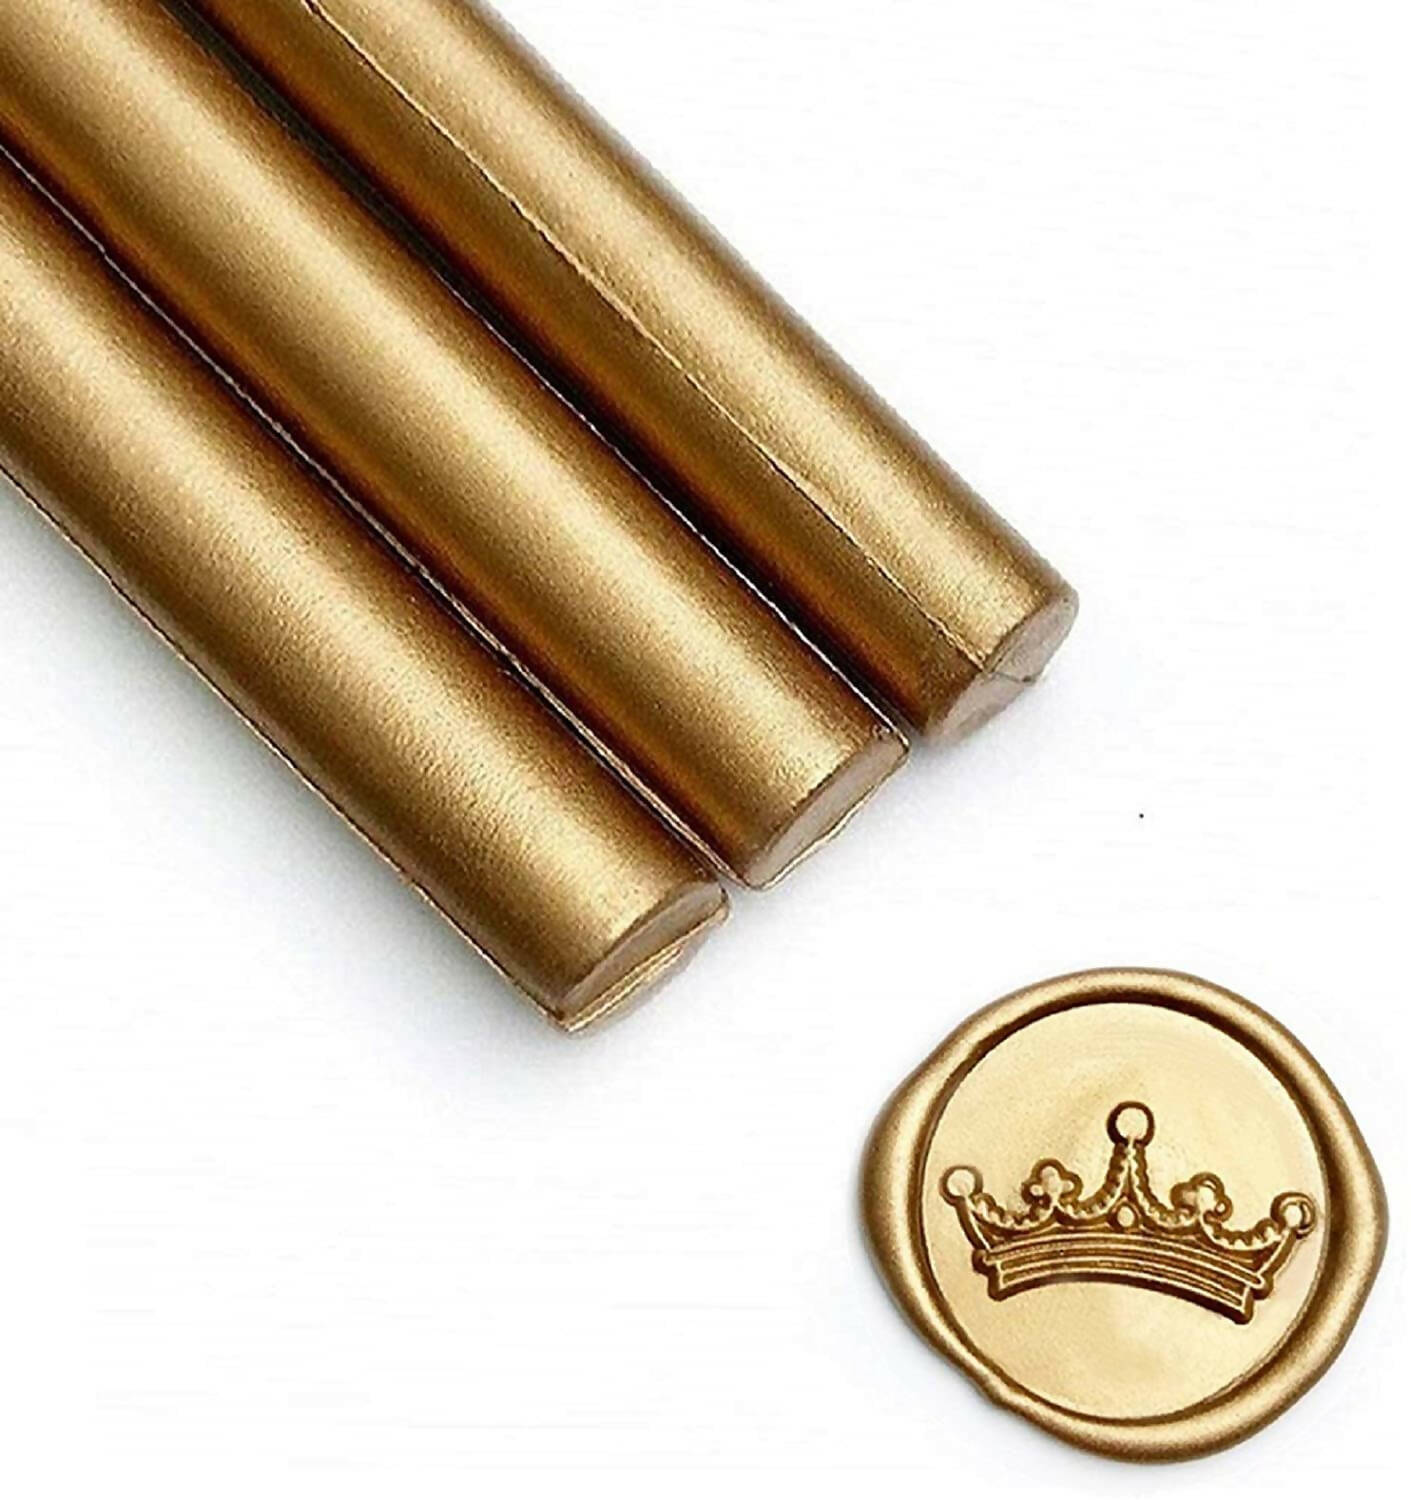 Pack of 5 - Glue Sealing Wax Sticks for Wax Seal Stamp - Metallic Antique Gold